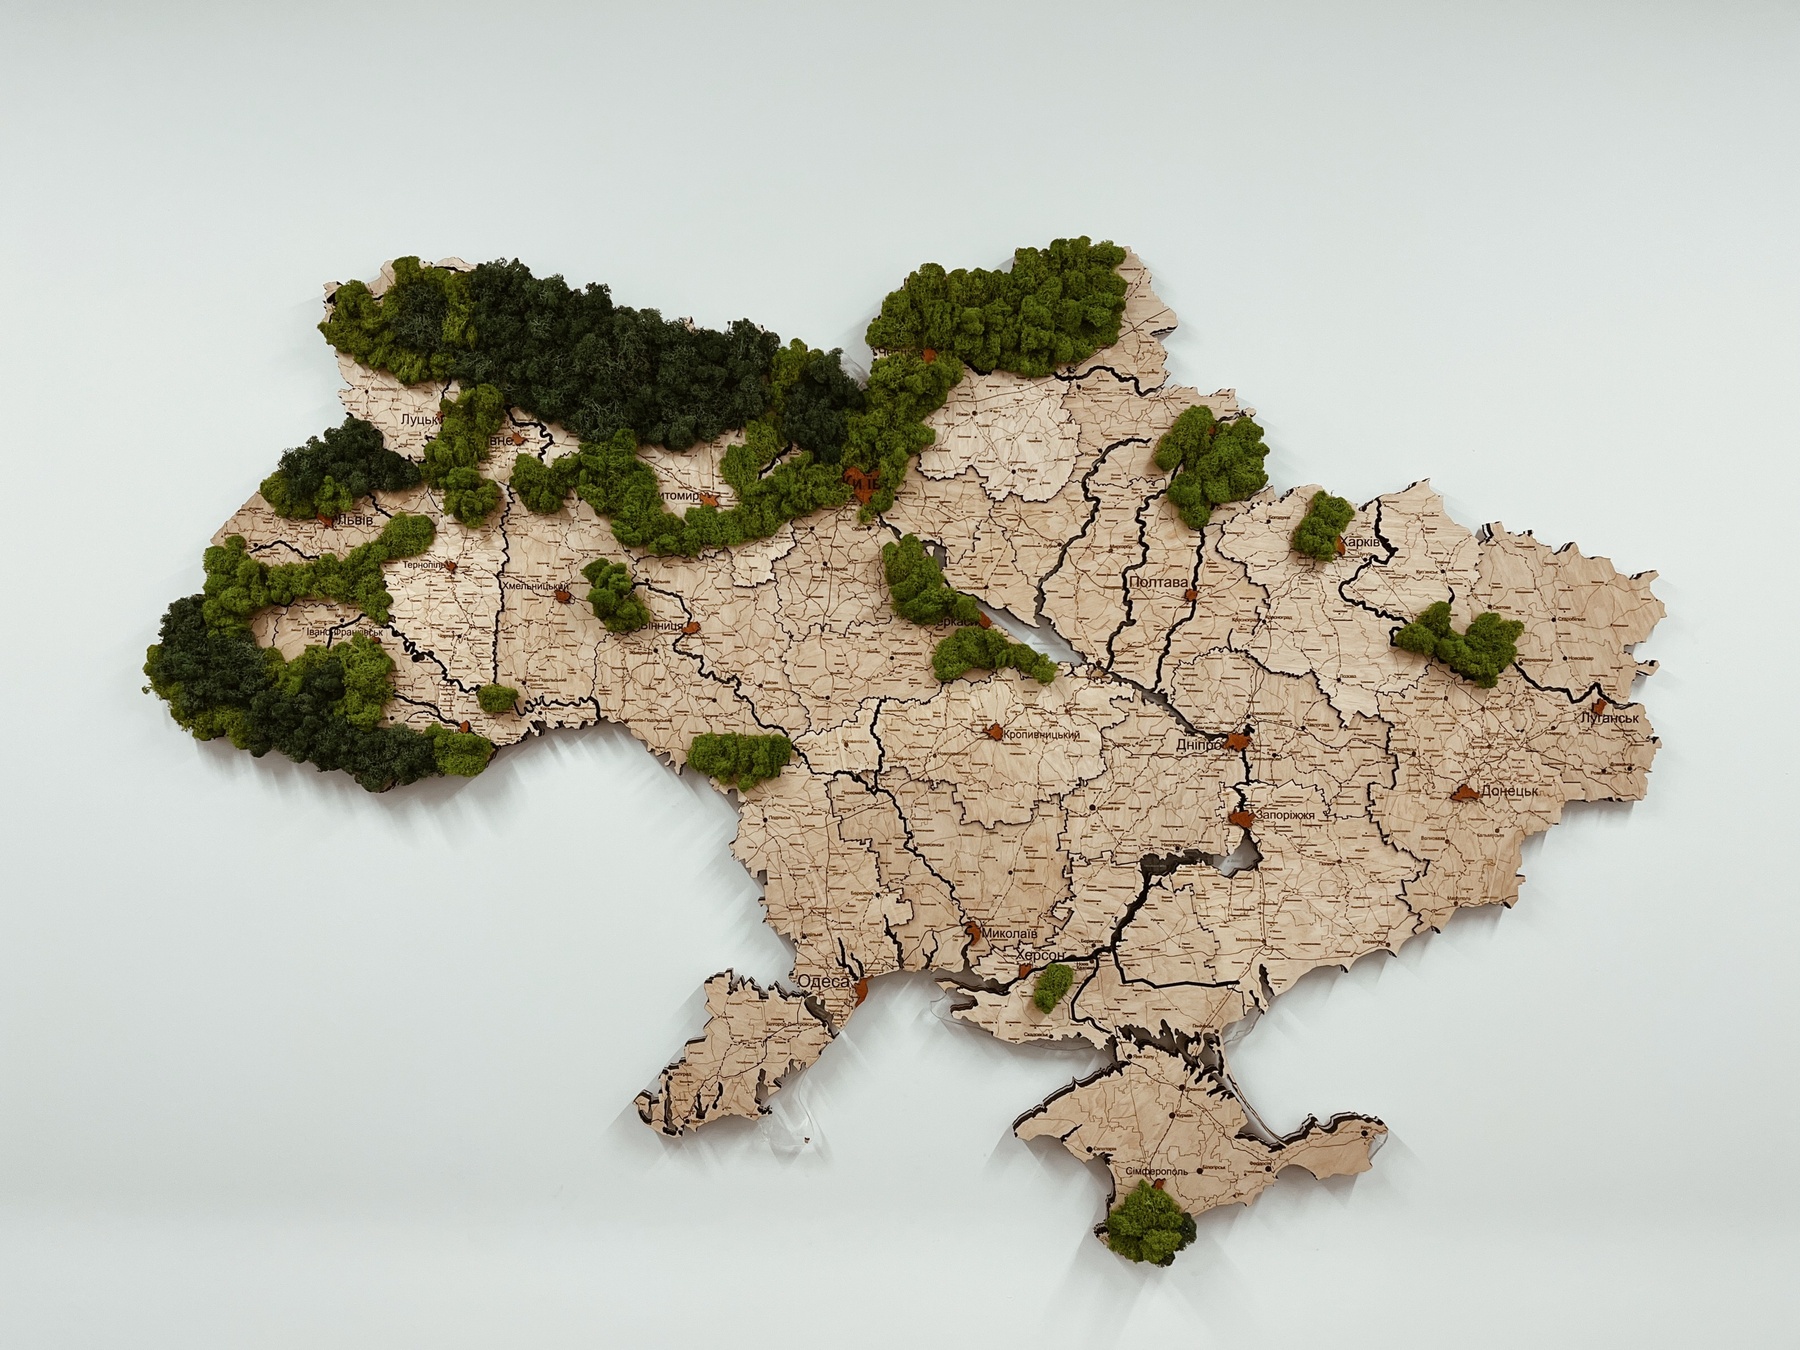 Wooden Map of the Forests of Ukraine 'L+' 200 x 135 cm